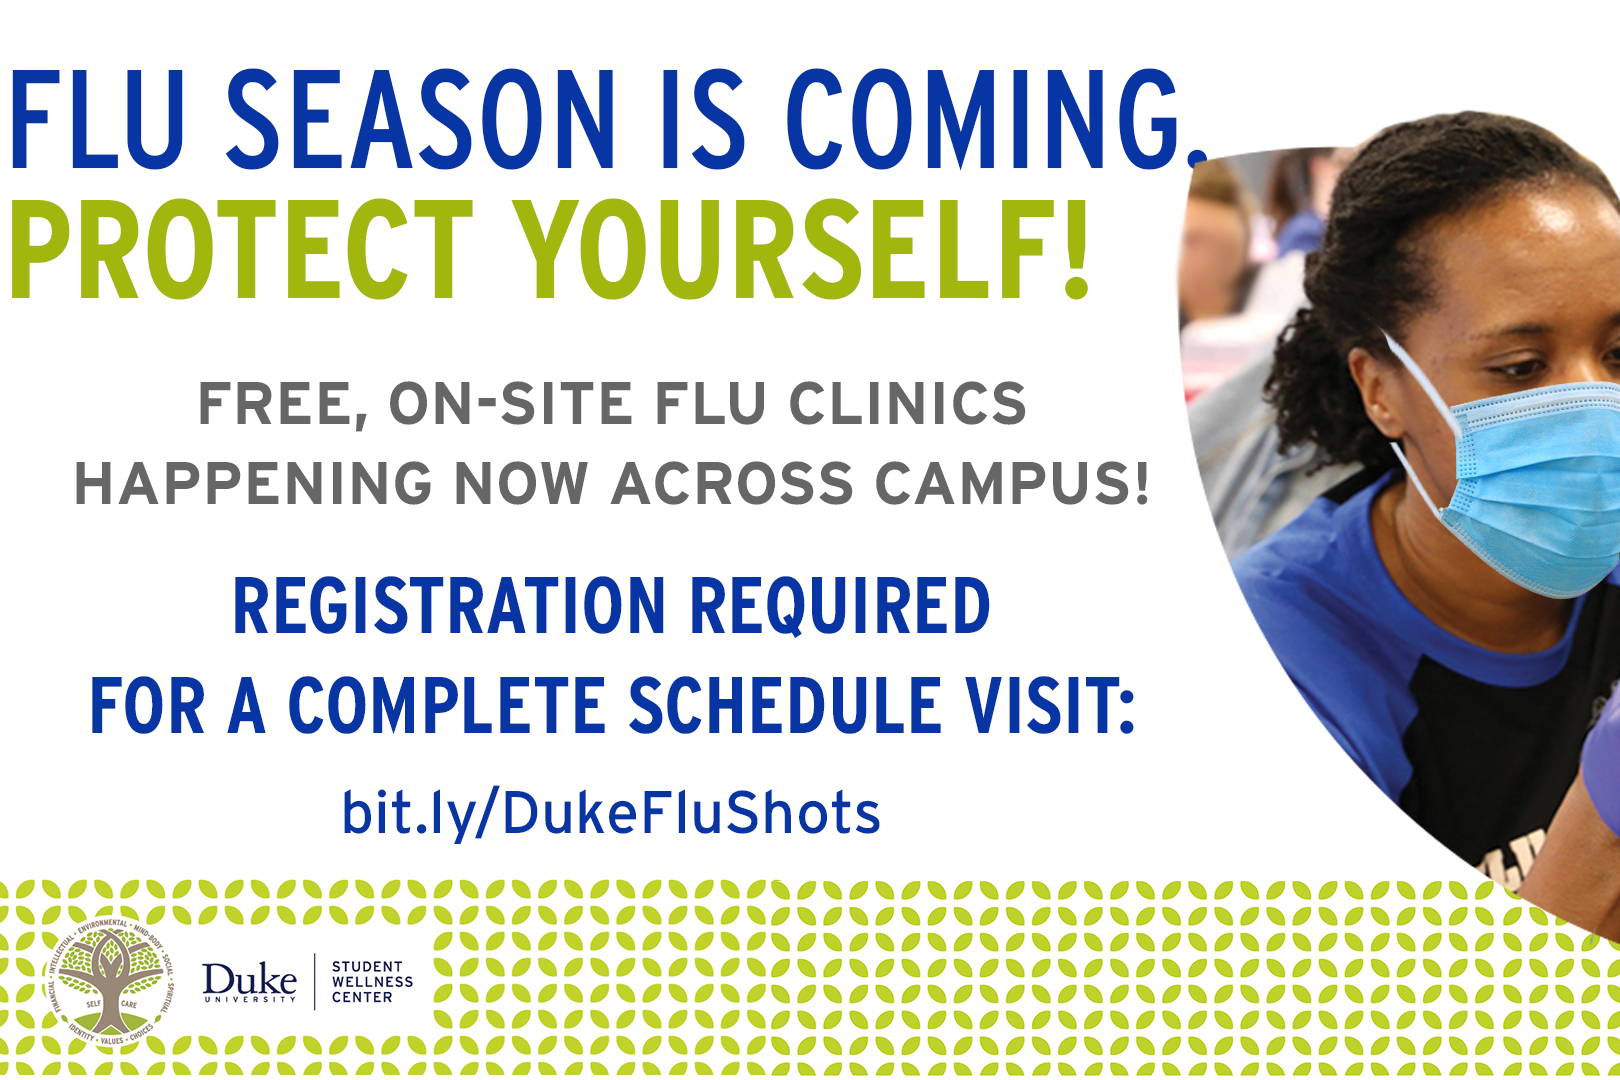 Flyer with woman with a mask on. Information reads: Flu Season is coming protect yourself! Free On Site Flu Clinics Happening Now Across Campus! Registration is required for a complete schedule visit: bit.ly/DukeFluShots